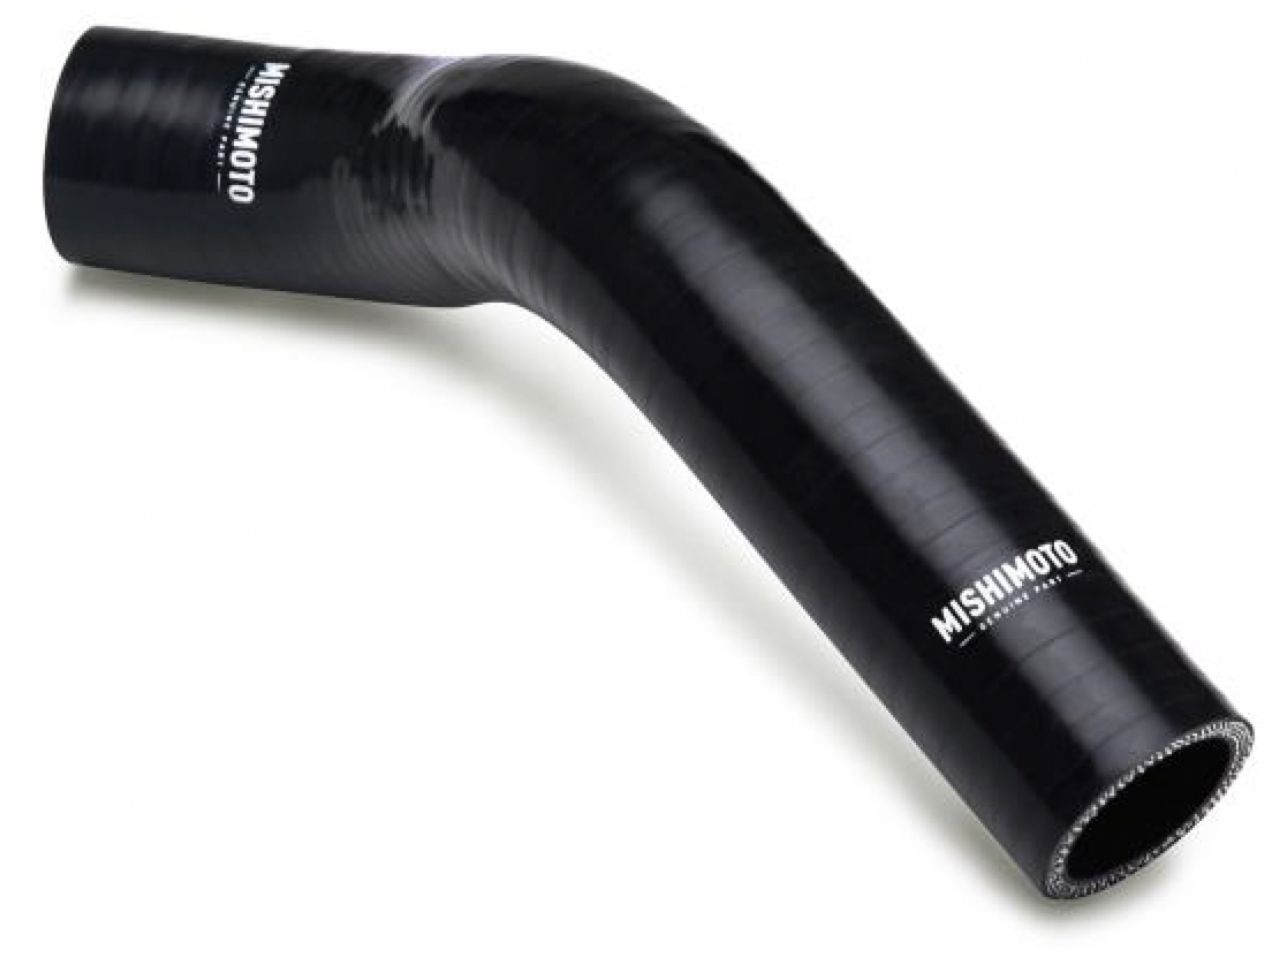 Mishimoto Ford Mustang Silicone Upper Radiator Hose